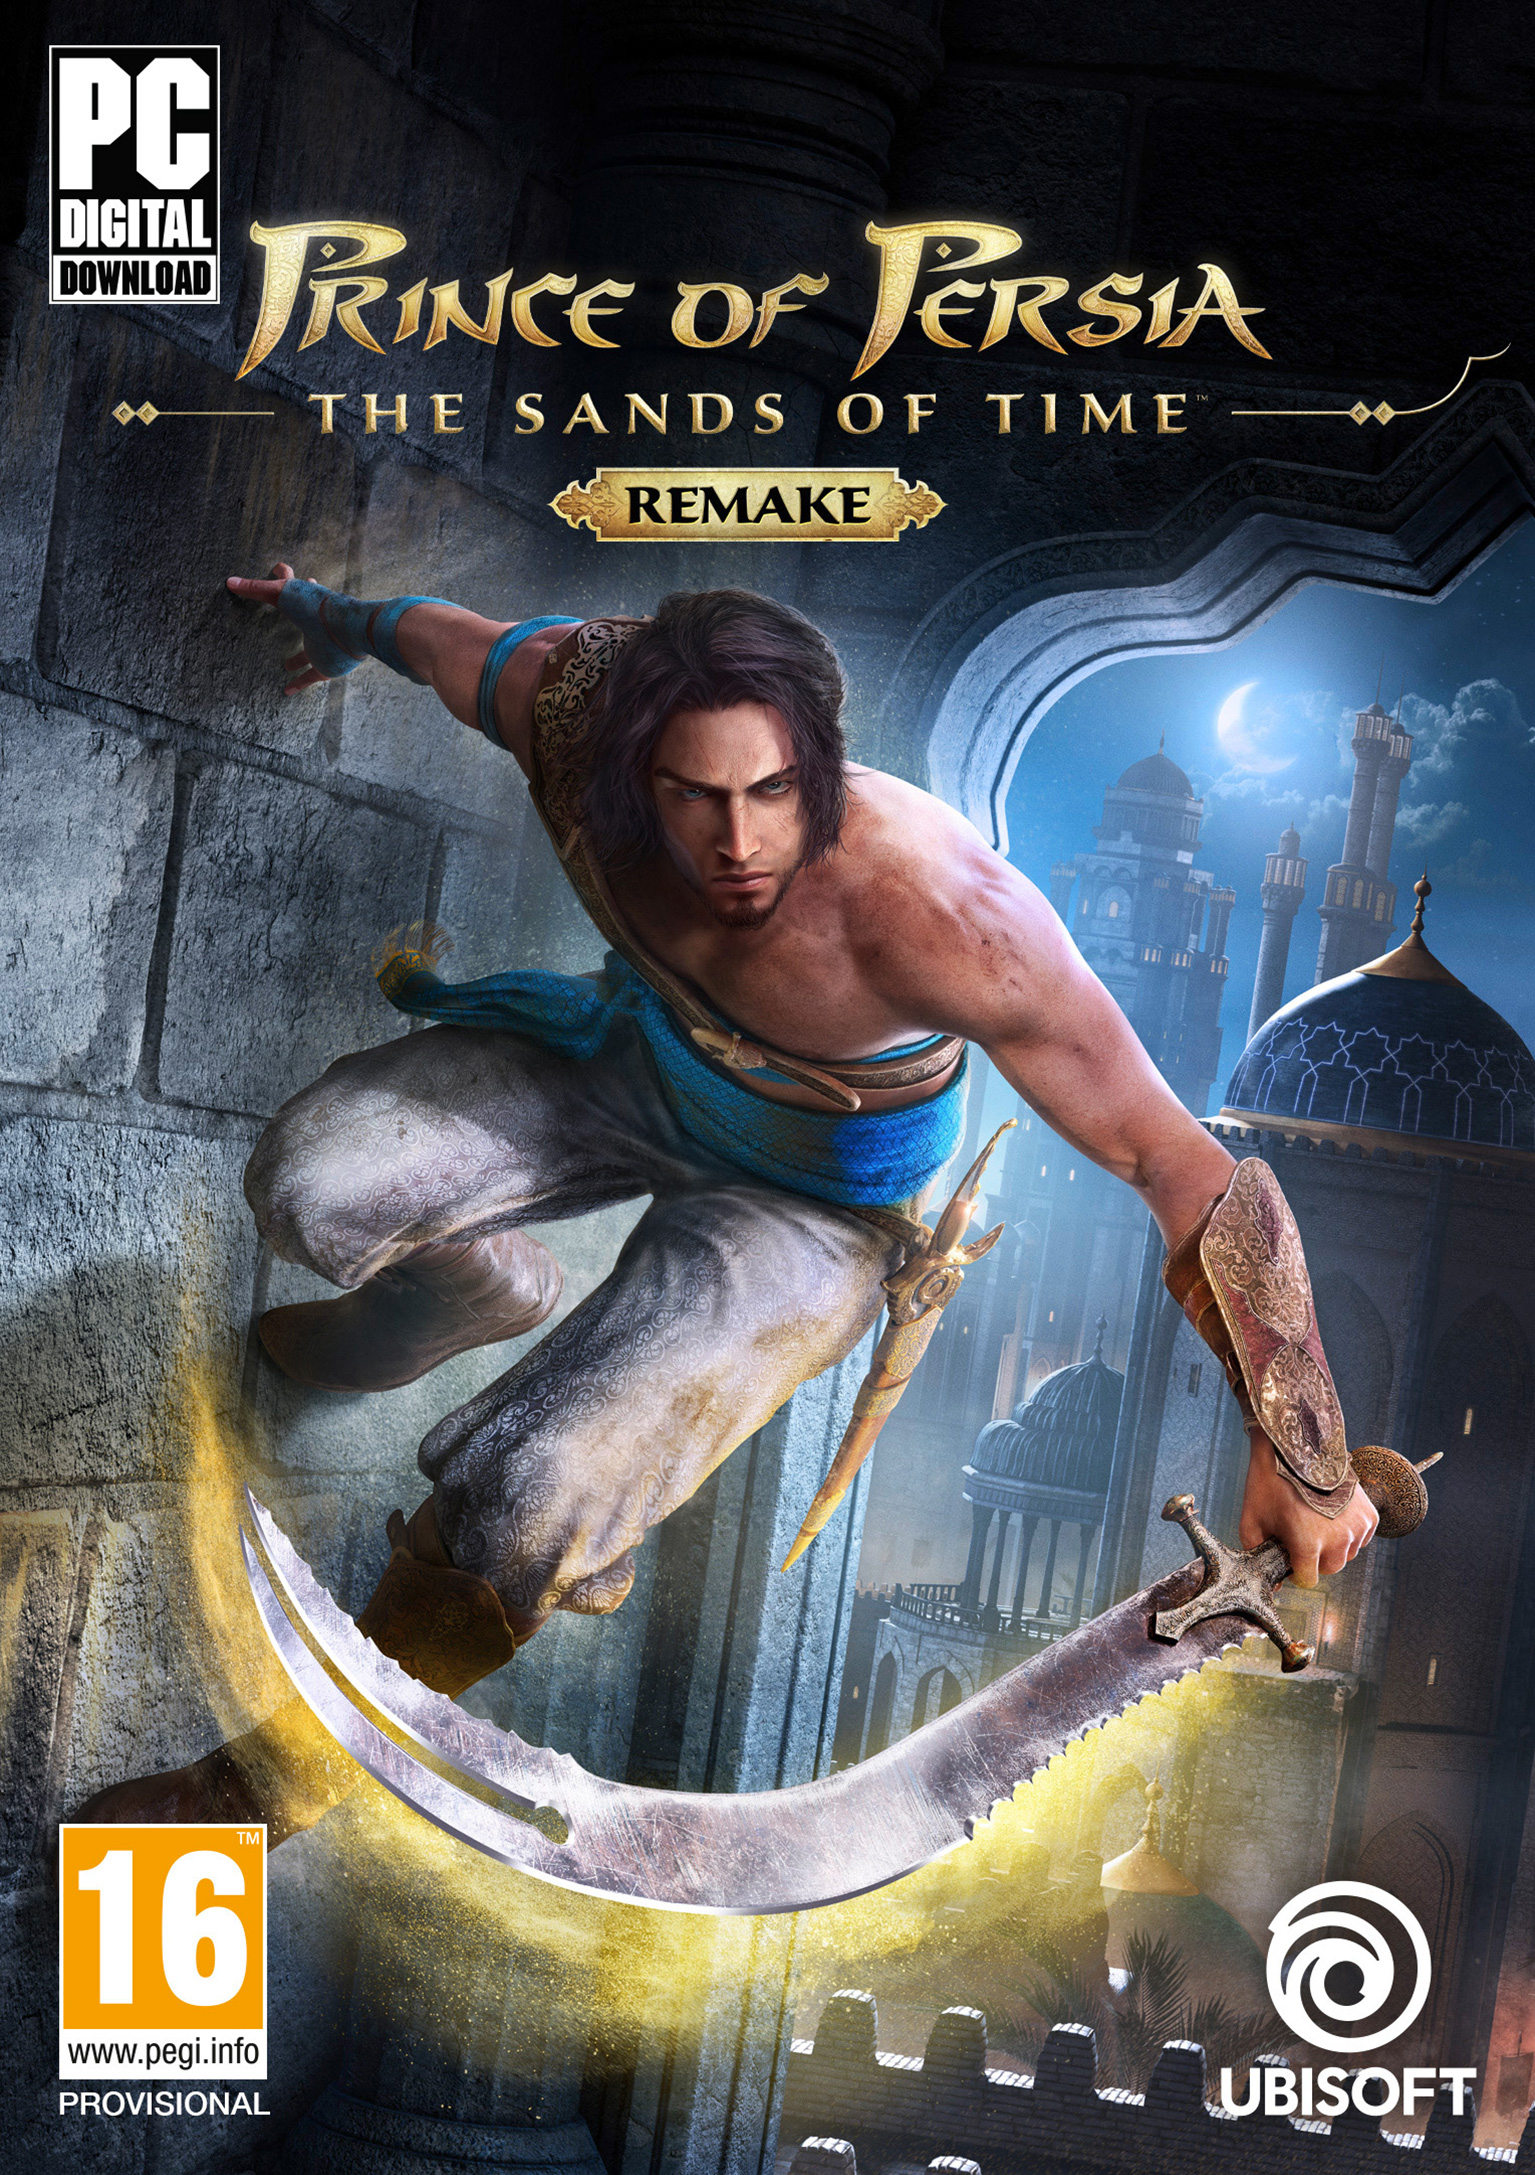 Prince of Persia: The Sands of Time Remake - predn DVD obal